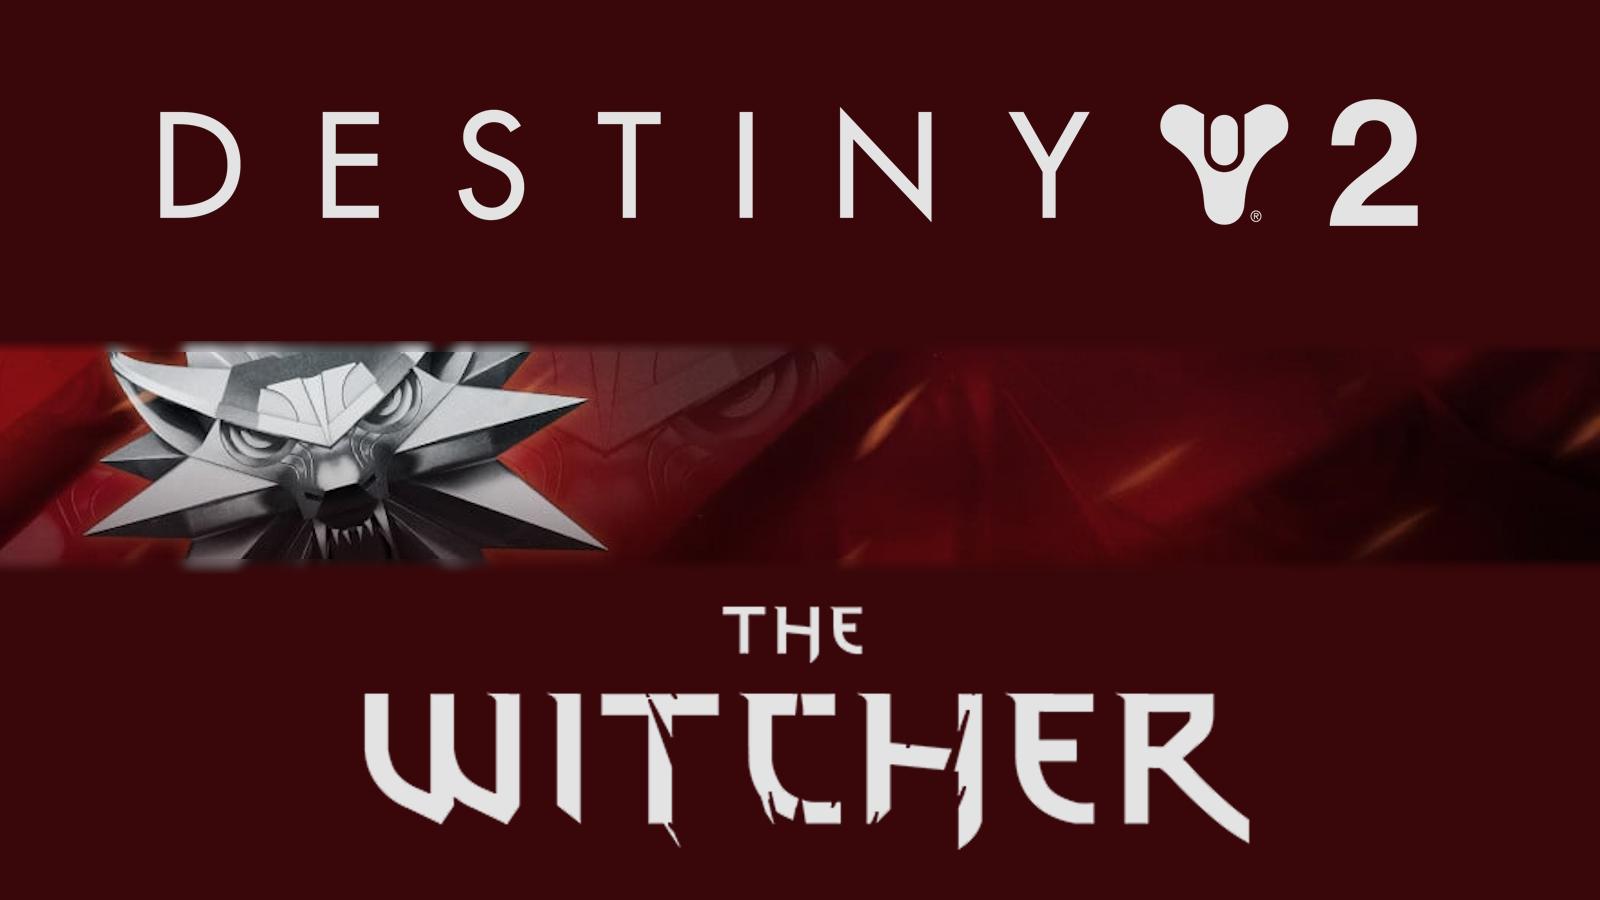 Never Lost, Always Found witcher emblem in destiny 2 with game logos